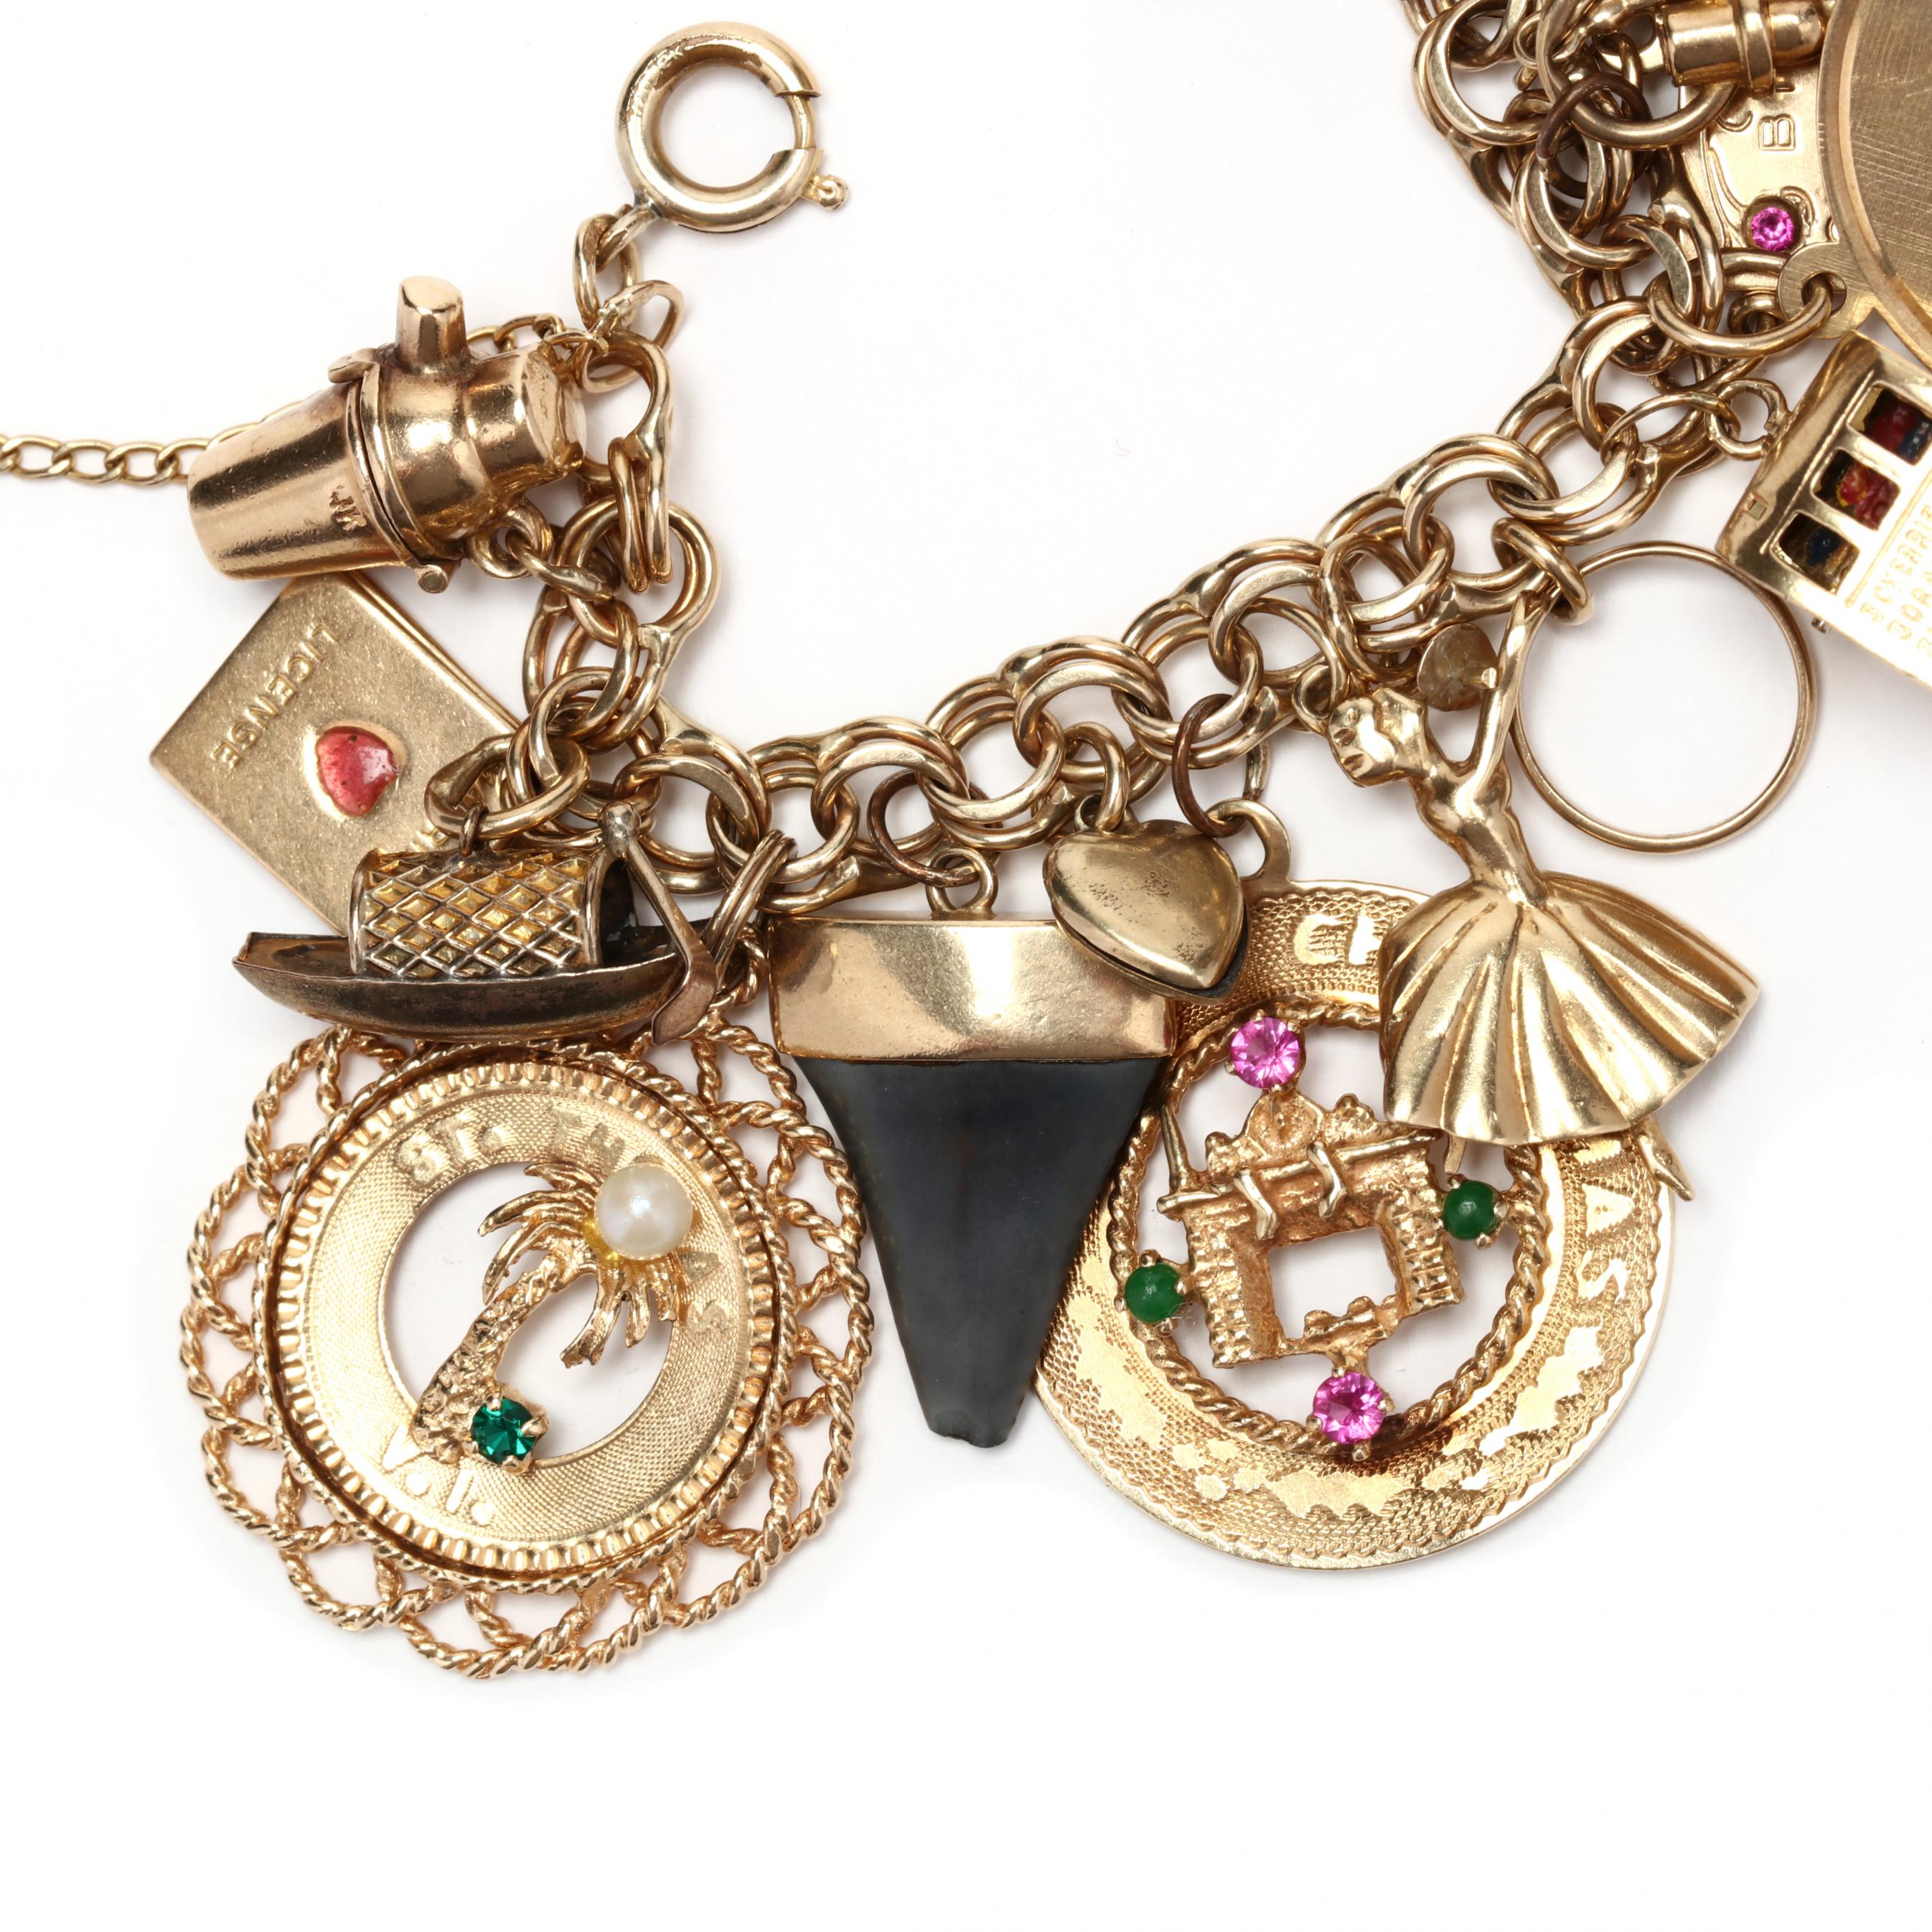 Gold Filled Charm Bracelet with Gold and Gold-Filled Charms (Lot 1048 -  Estate Jewelry, Fashion & Sterling SilverJun 16, 2022, 10:00am)